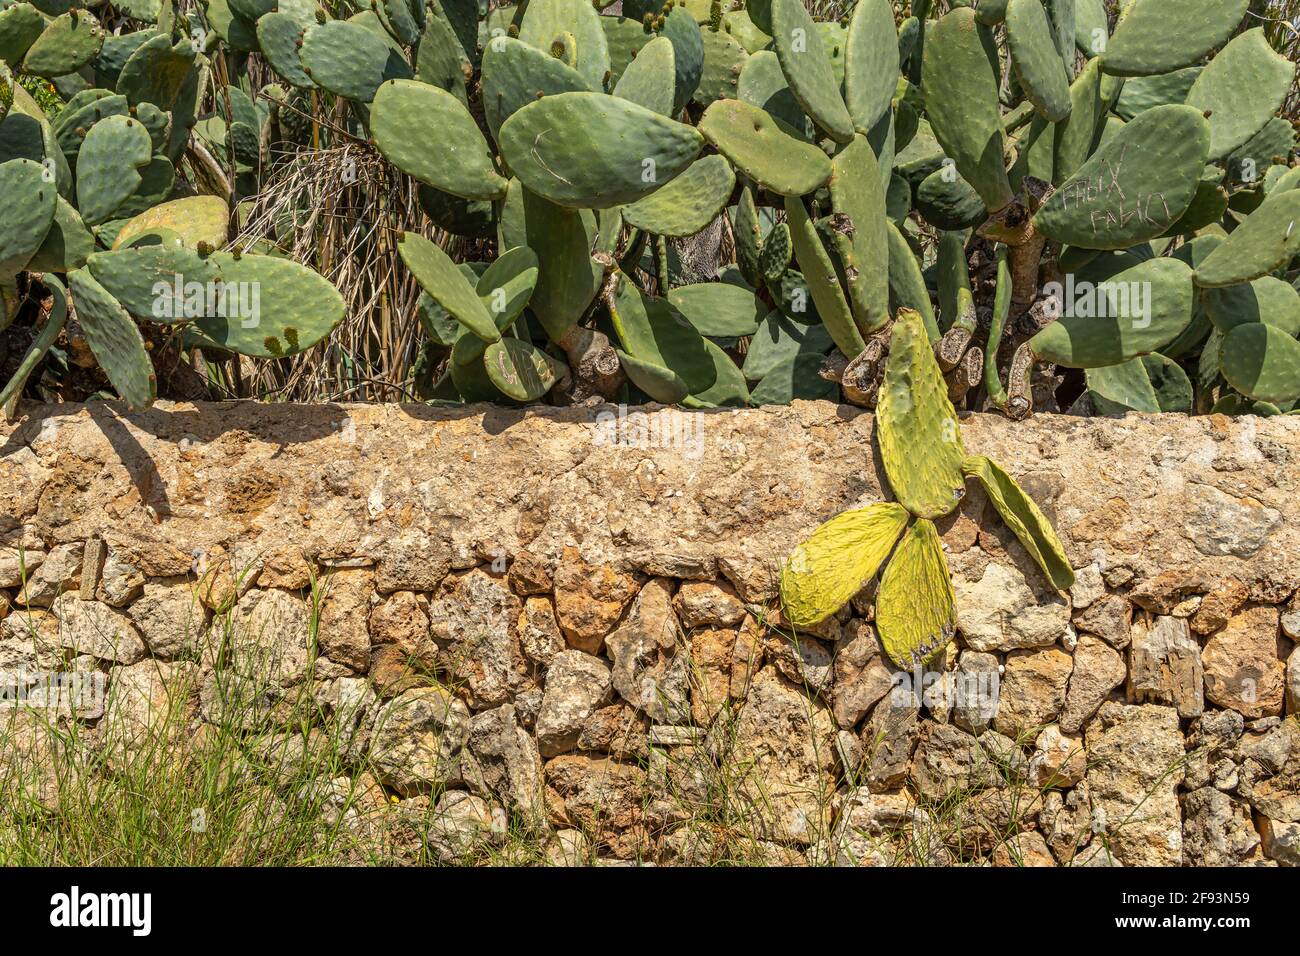 General view of a prickly pear cactus, Opuntia ficus-indica, during the spring season, showing the emergence of new leaves and fuits, in a rural road Stock Photo